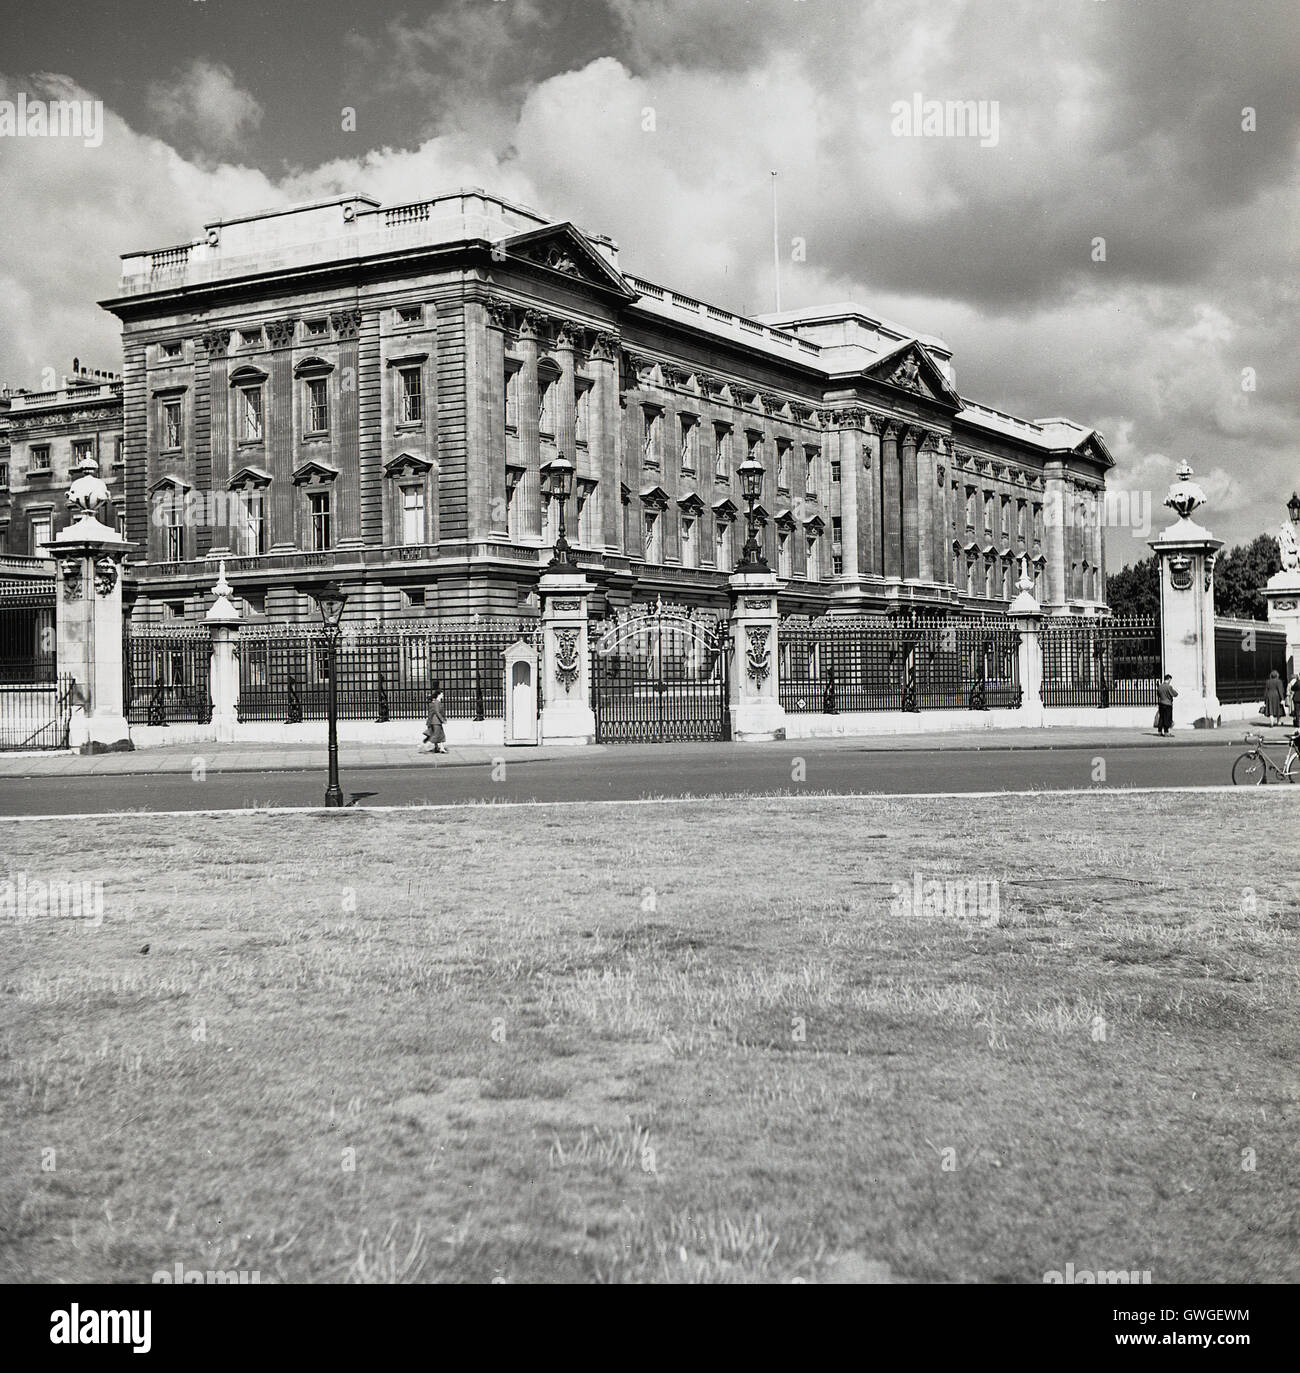 1950s Historical View By J Allan Cash Of Buckingham Palace The London Residence Of The Queen 